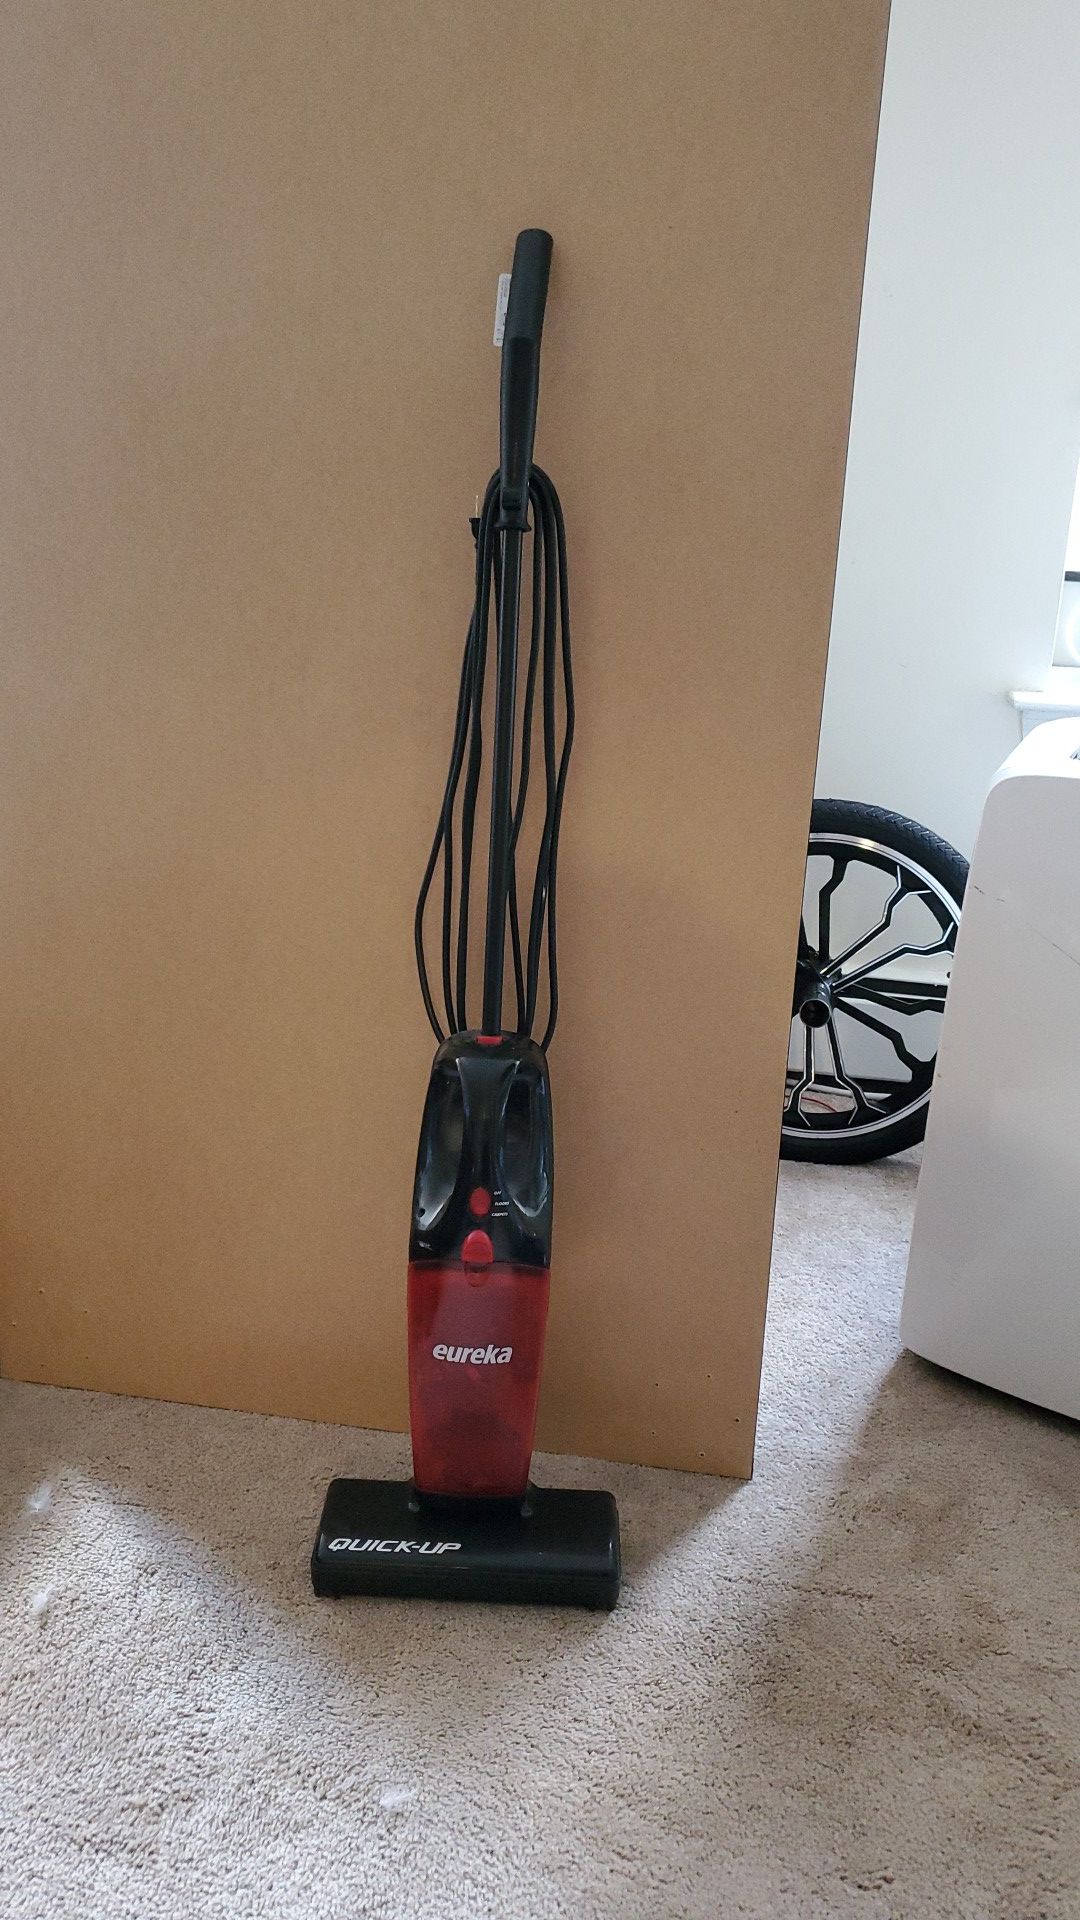 Moving everything needs a new home! Vacuum